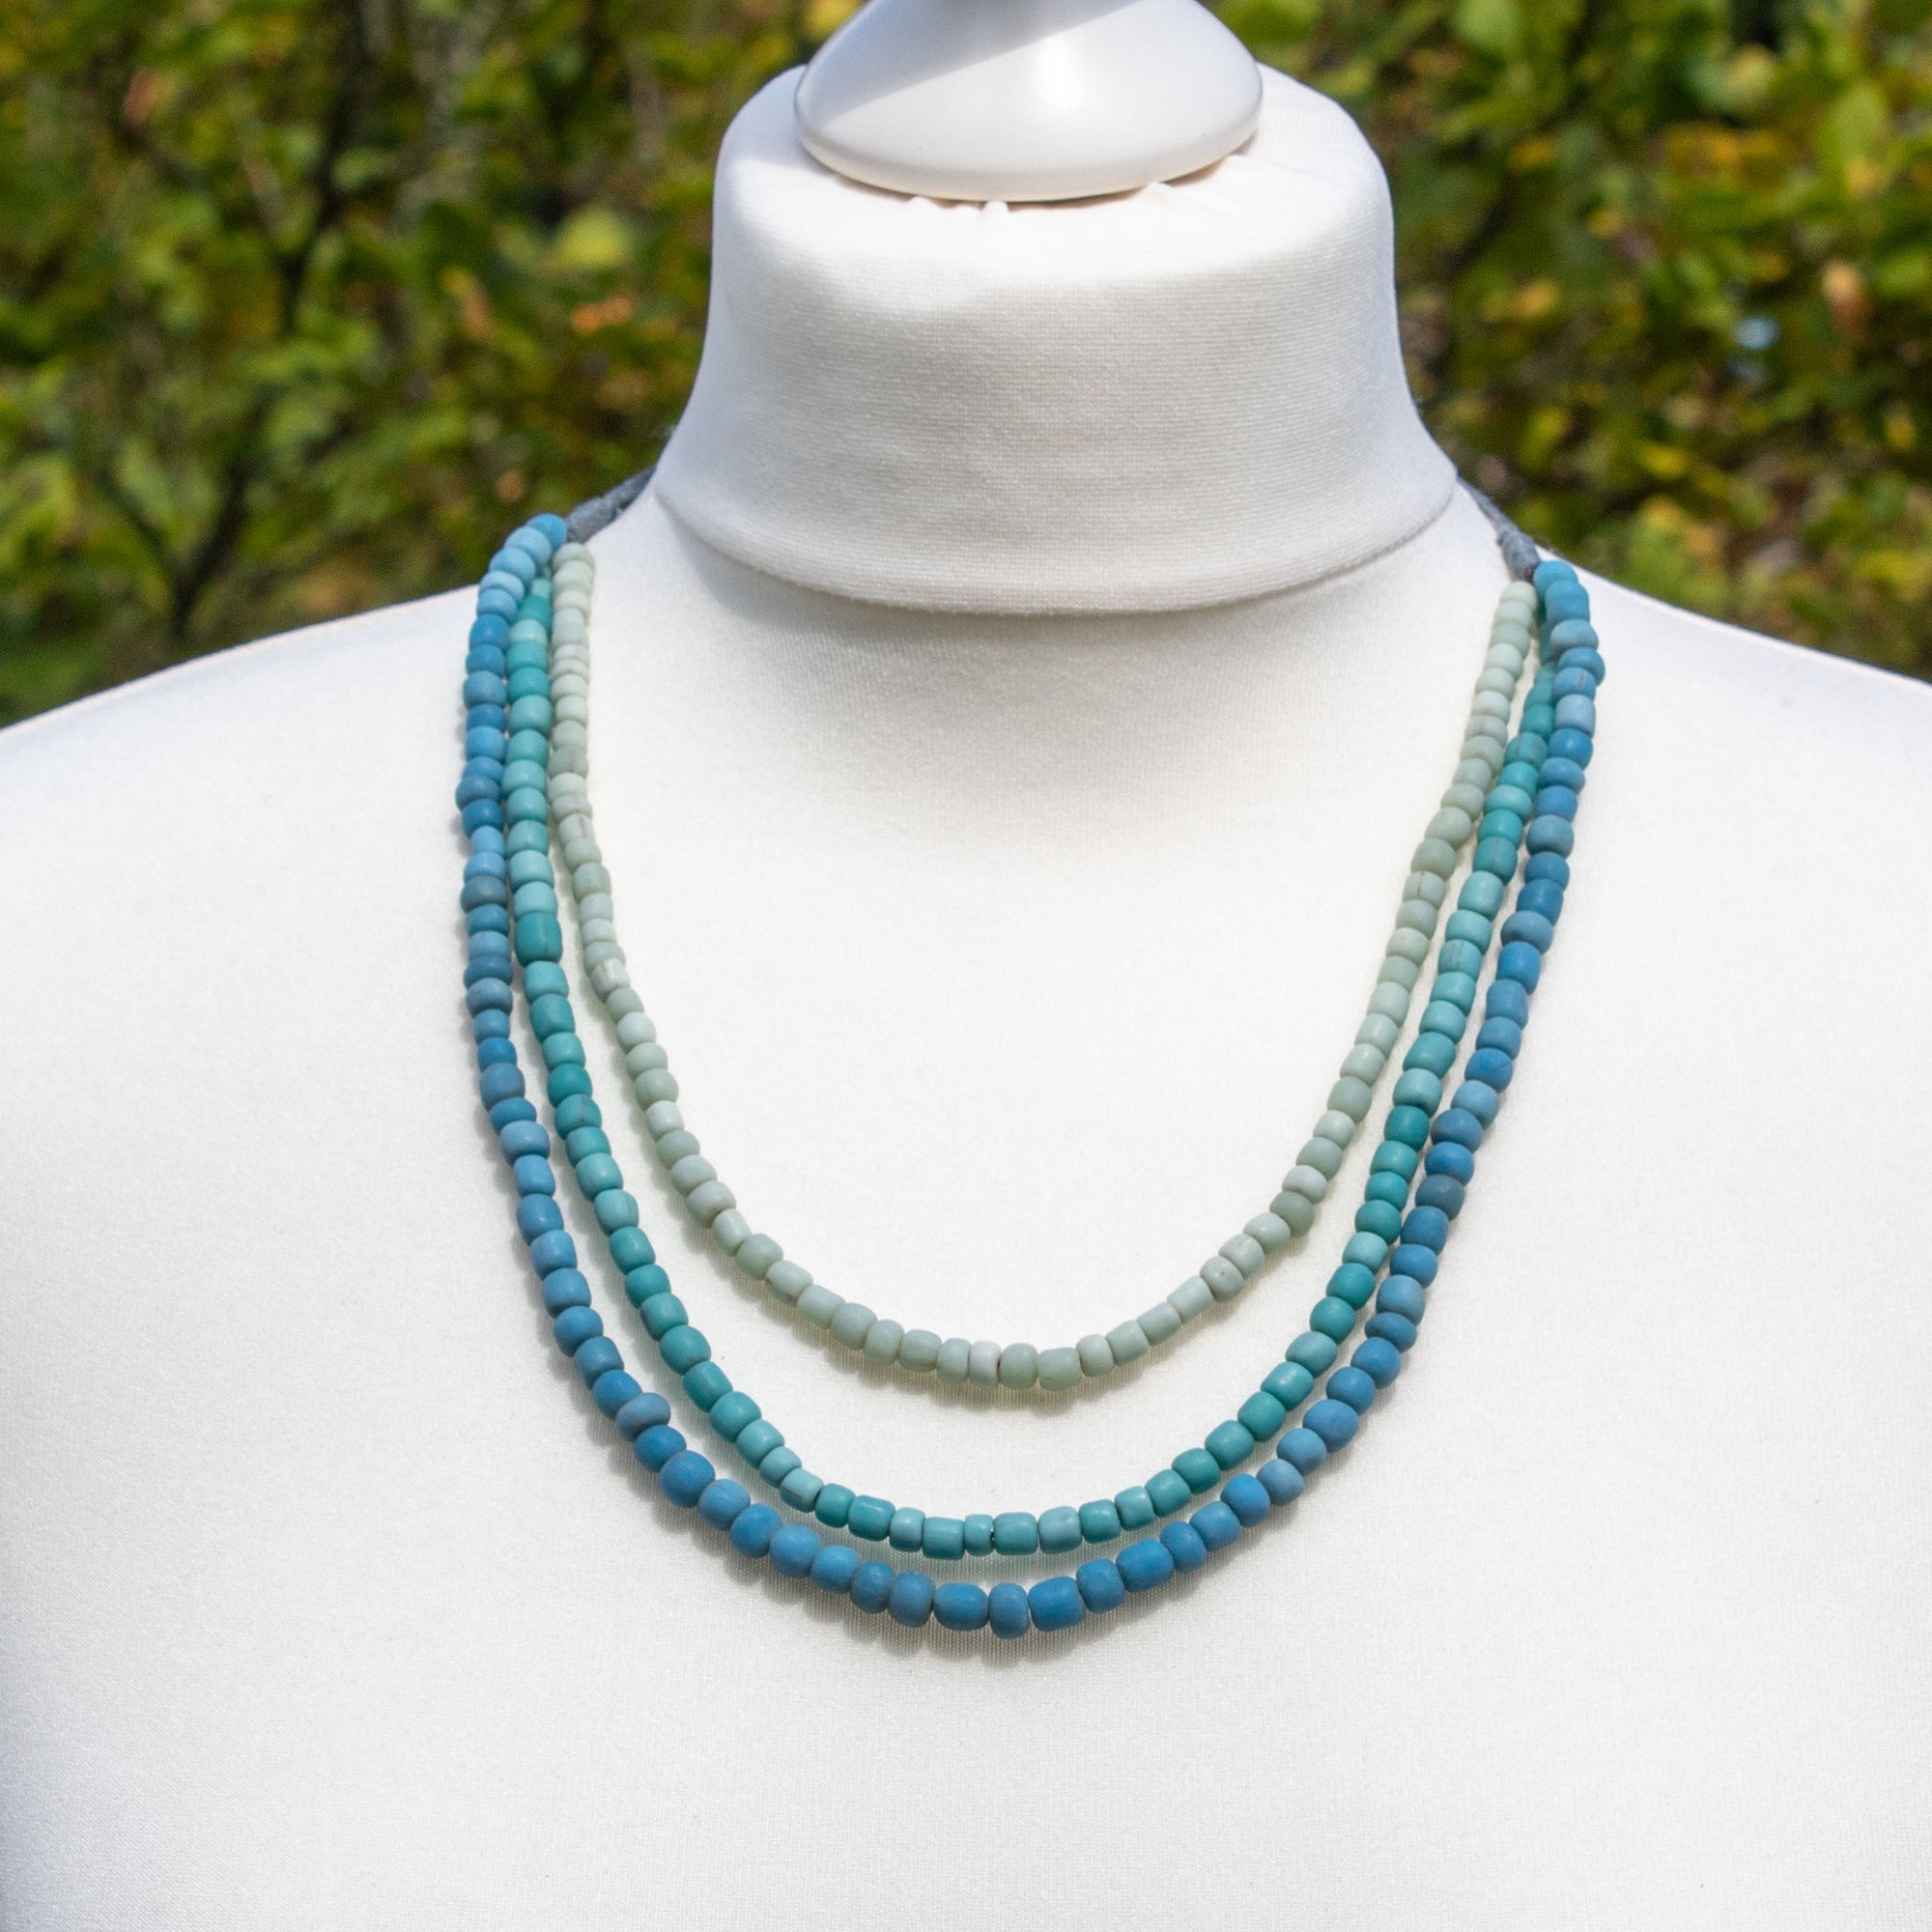 Pale Blue & Turquoise Glass Bead Necklace | Necklace - The Naughty Shrew